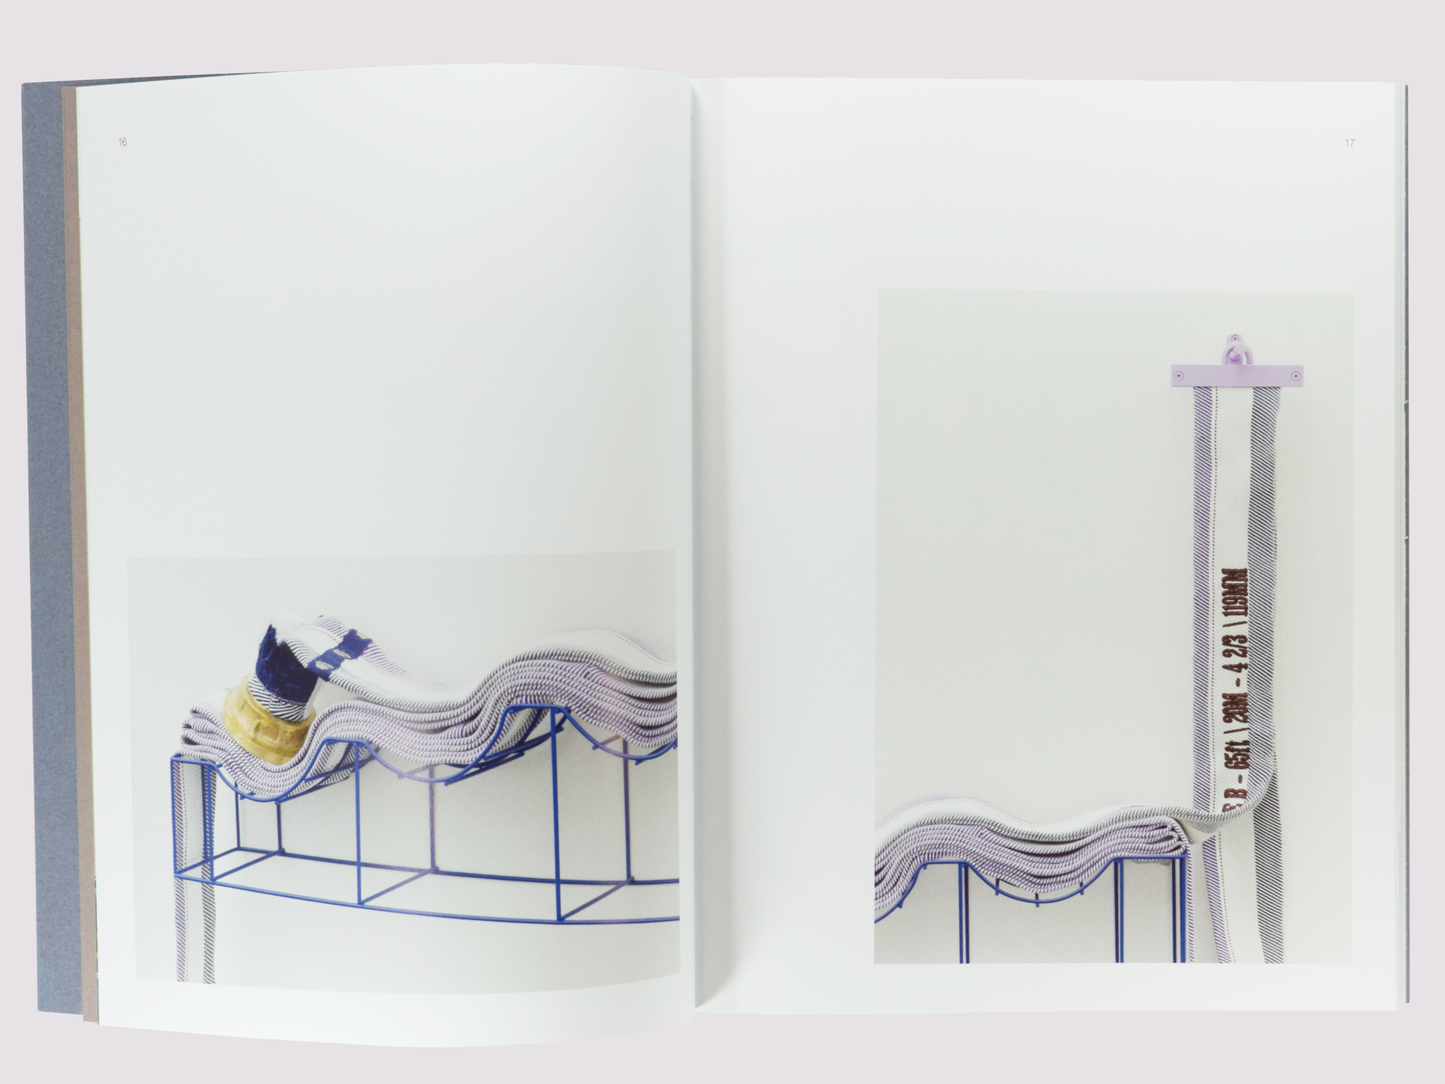 Hot Cottons/Magali Reus published by Bergen Kunsthall/South London Gallery/Sternberg Press